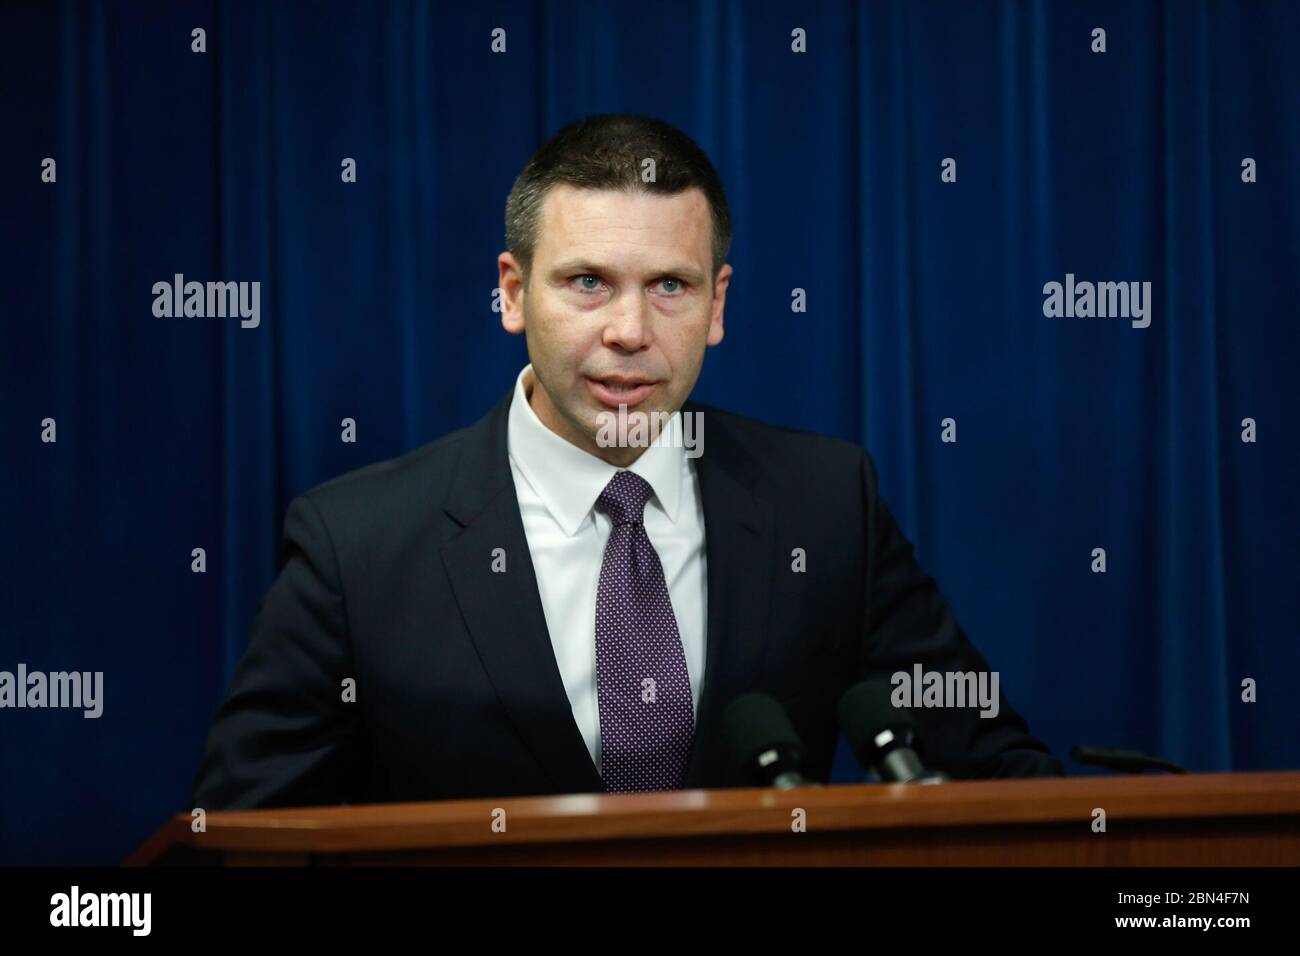 U.S. Customs and Border Protection Commissioner Kevin McAleenan and Commander, United States Northern Command and North American Aerospace Defense Command General Terrence John O'Shaughnessy (not pictured) hosted a joint press conference at CBP Headquarters in Washington, D.C., on October 29, 2018. CBP Stock Photo